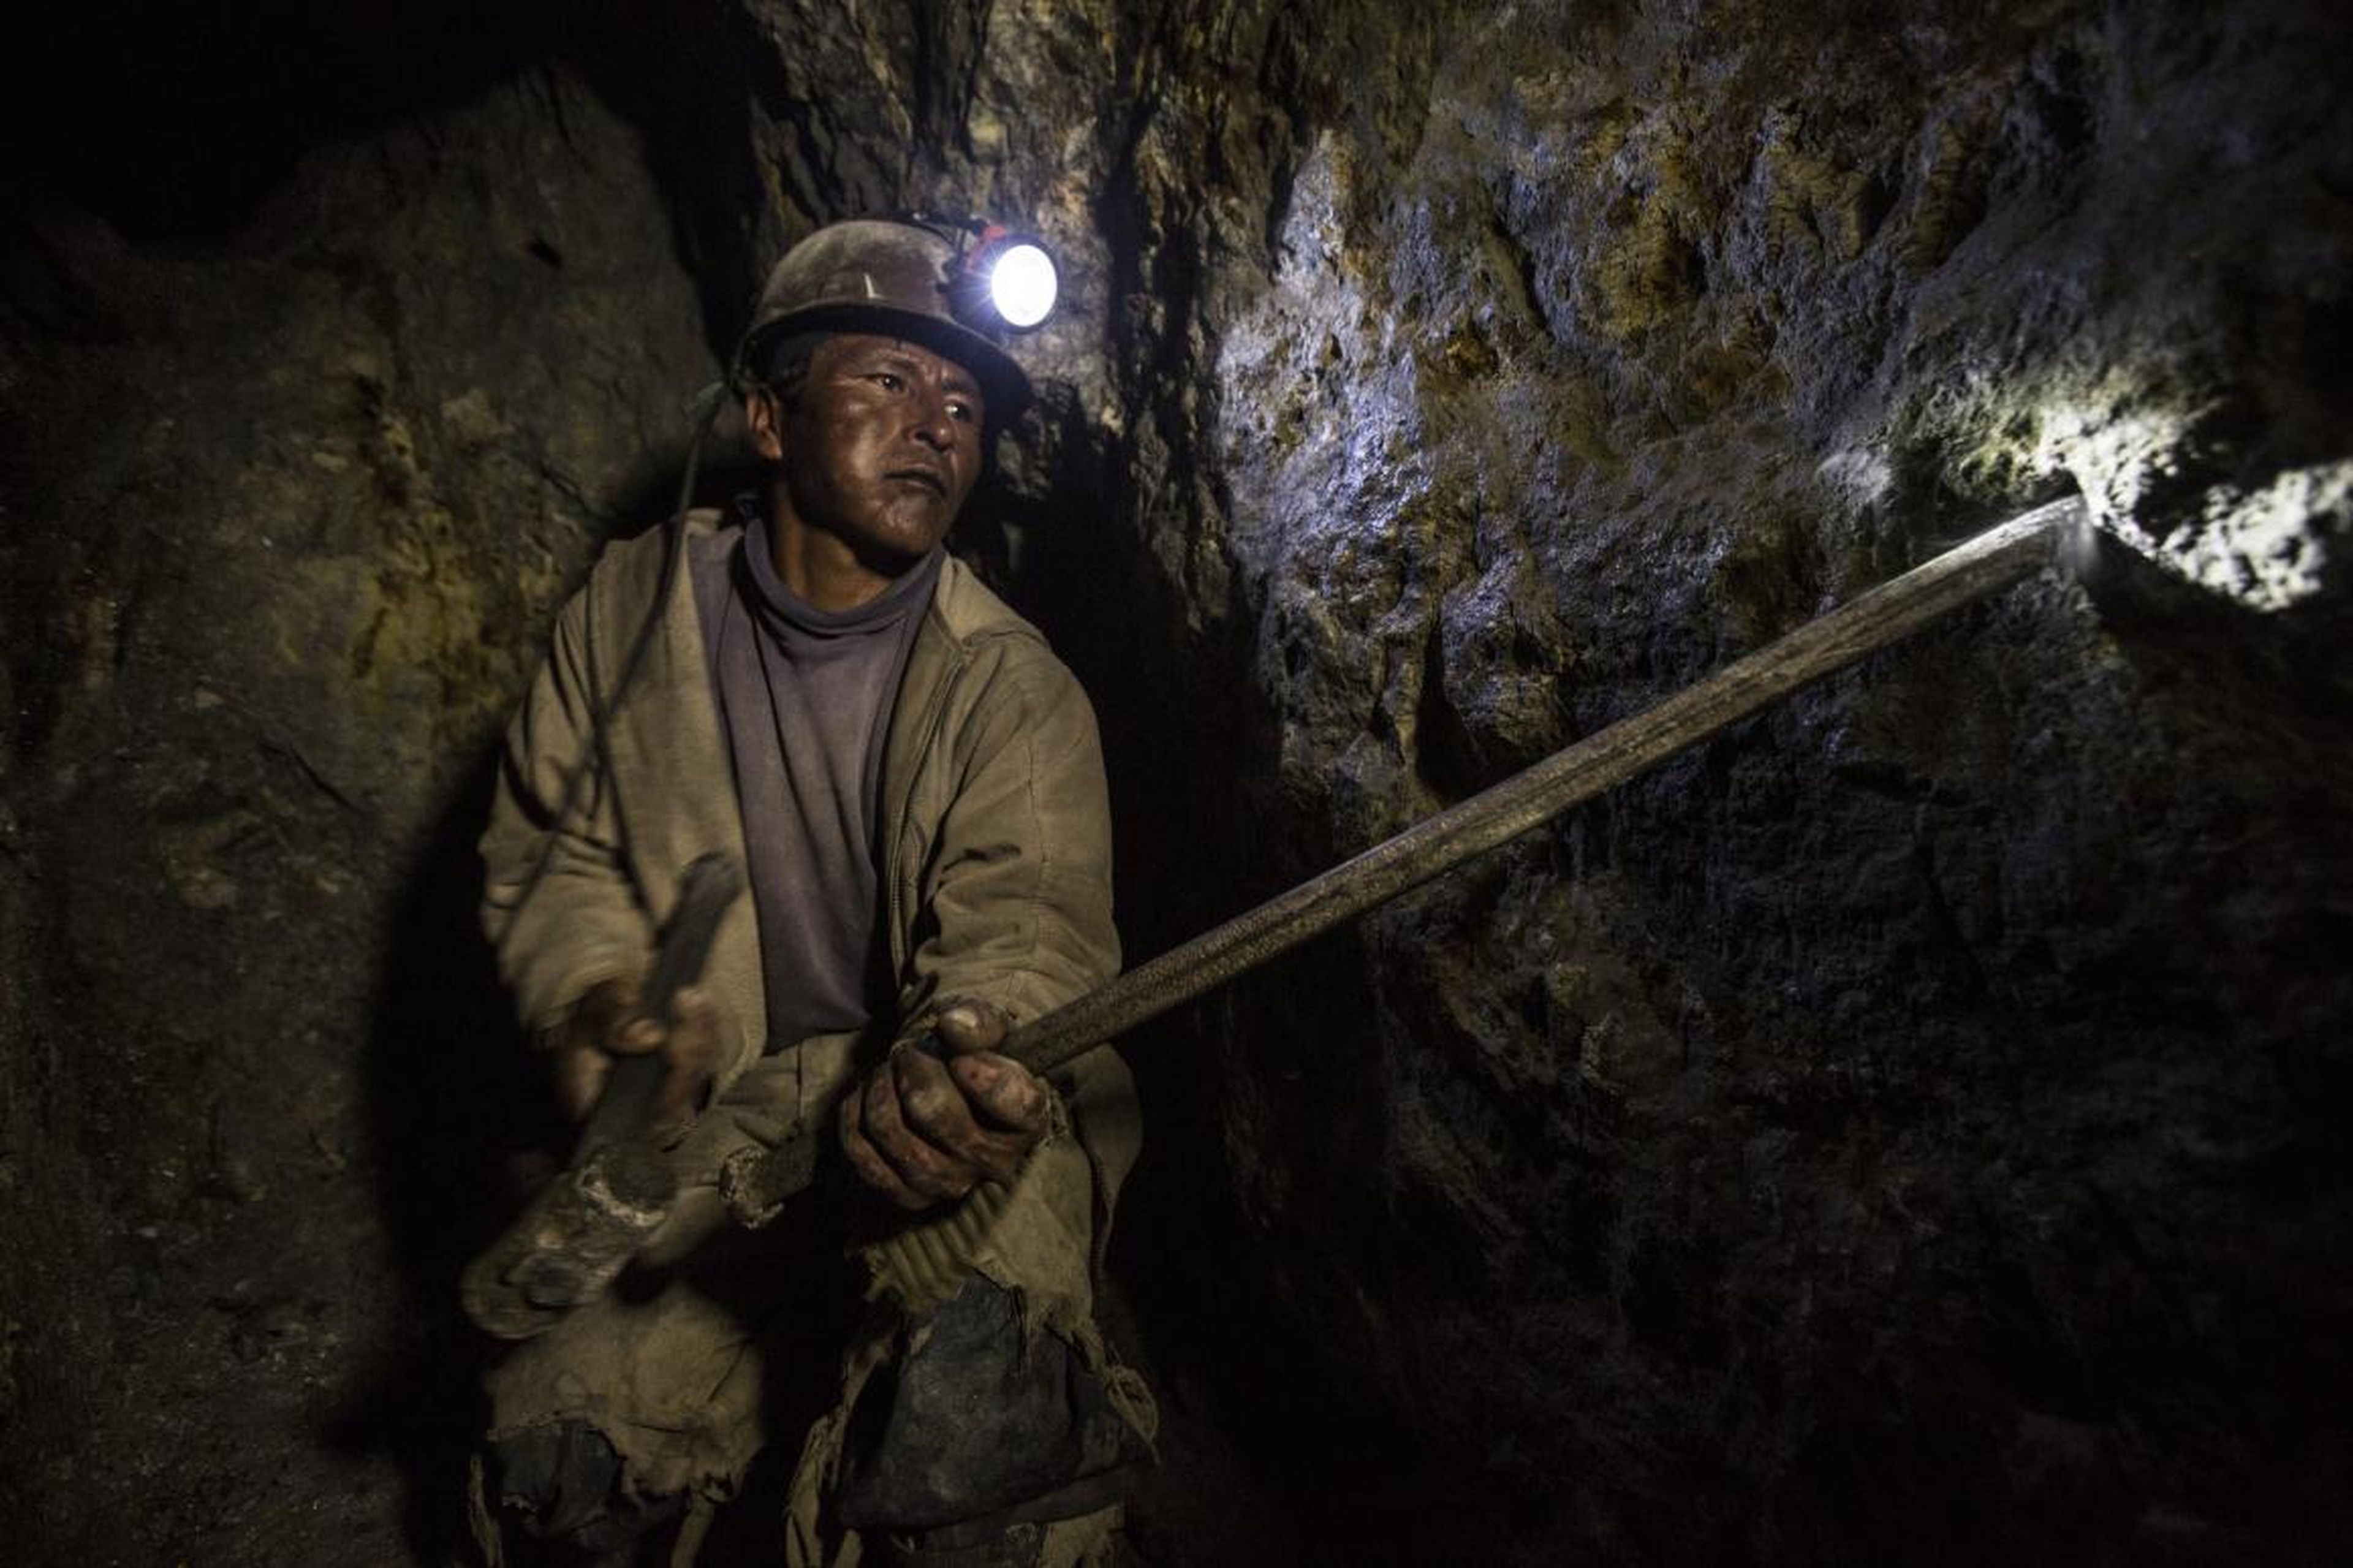 "Everyone that I spoke with had lost family members and friends to work on that mountain," Brown said. "Everyone." In this 2016 photo, a miner chisels out holes for dynamite.